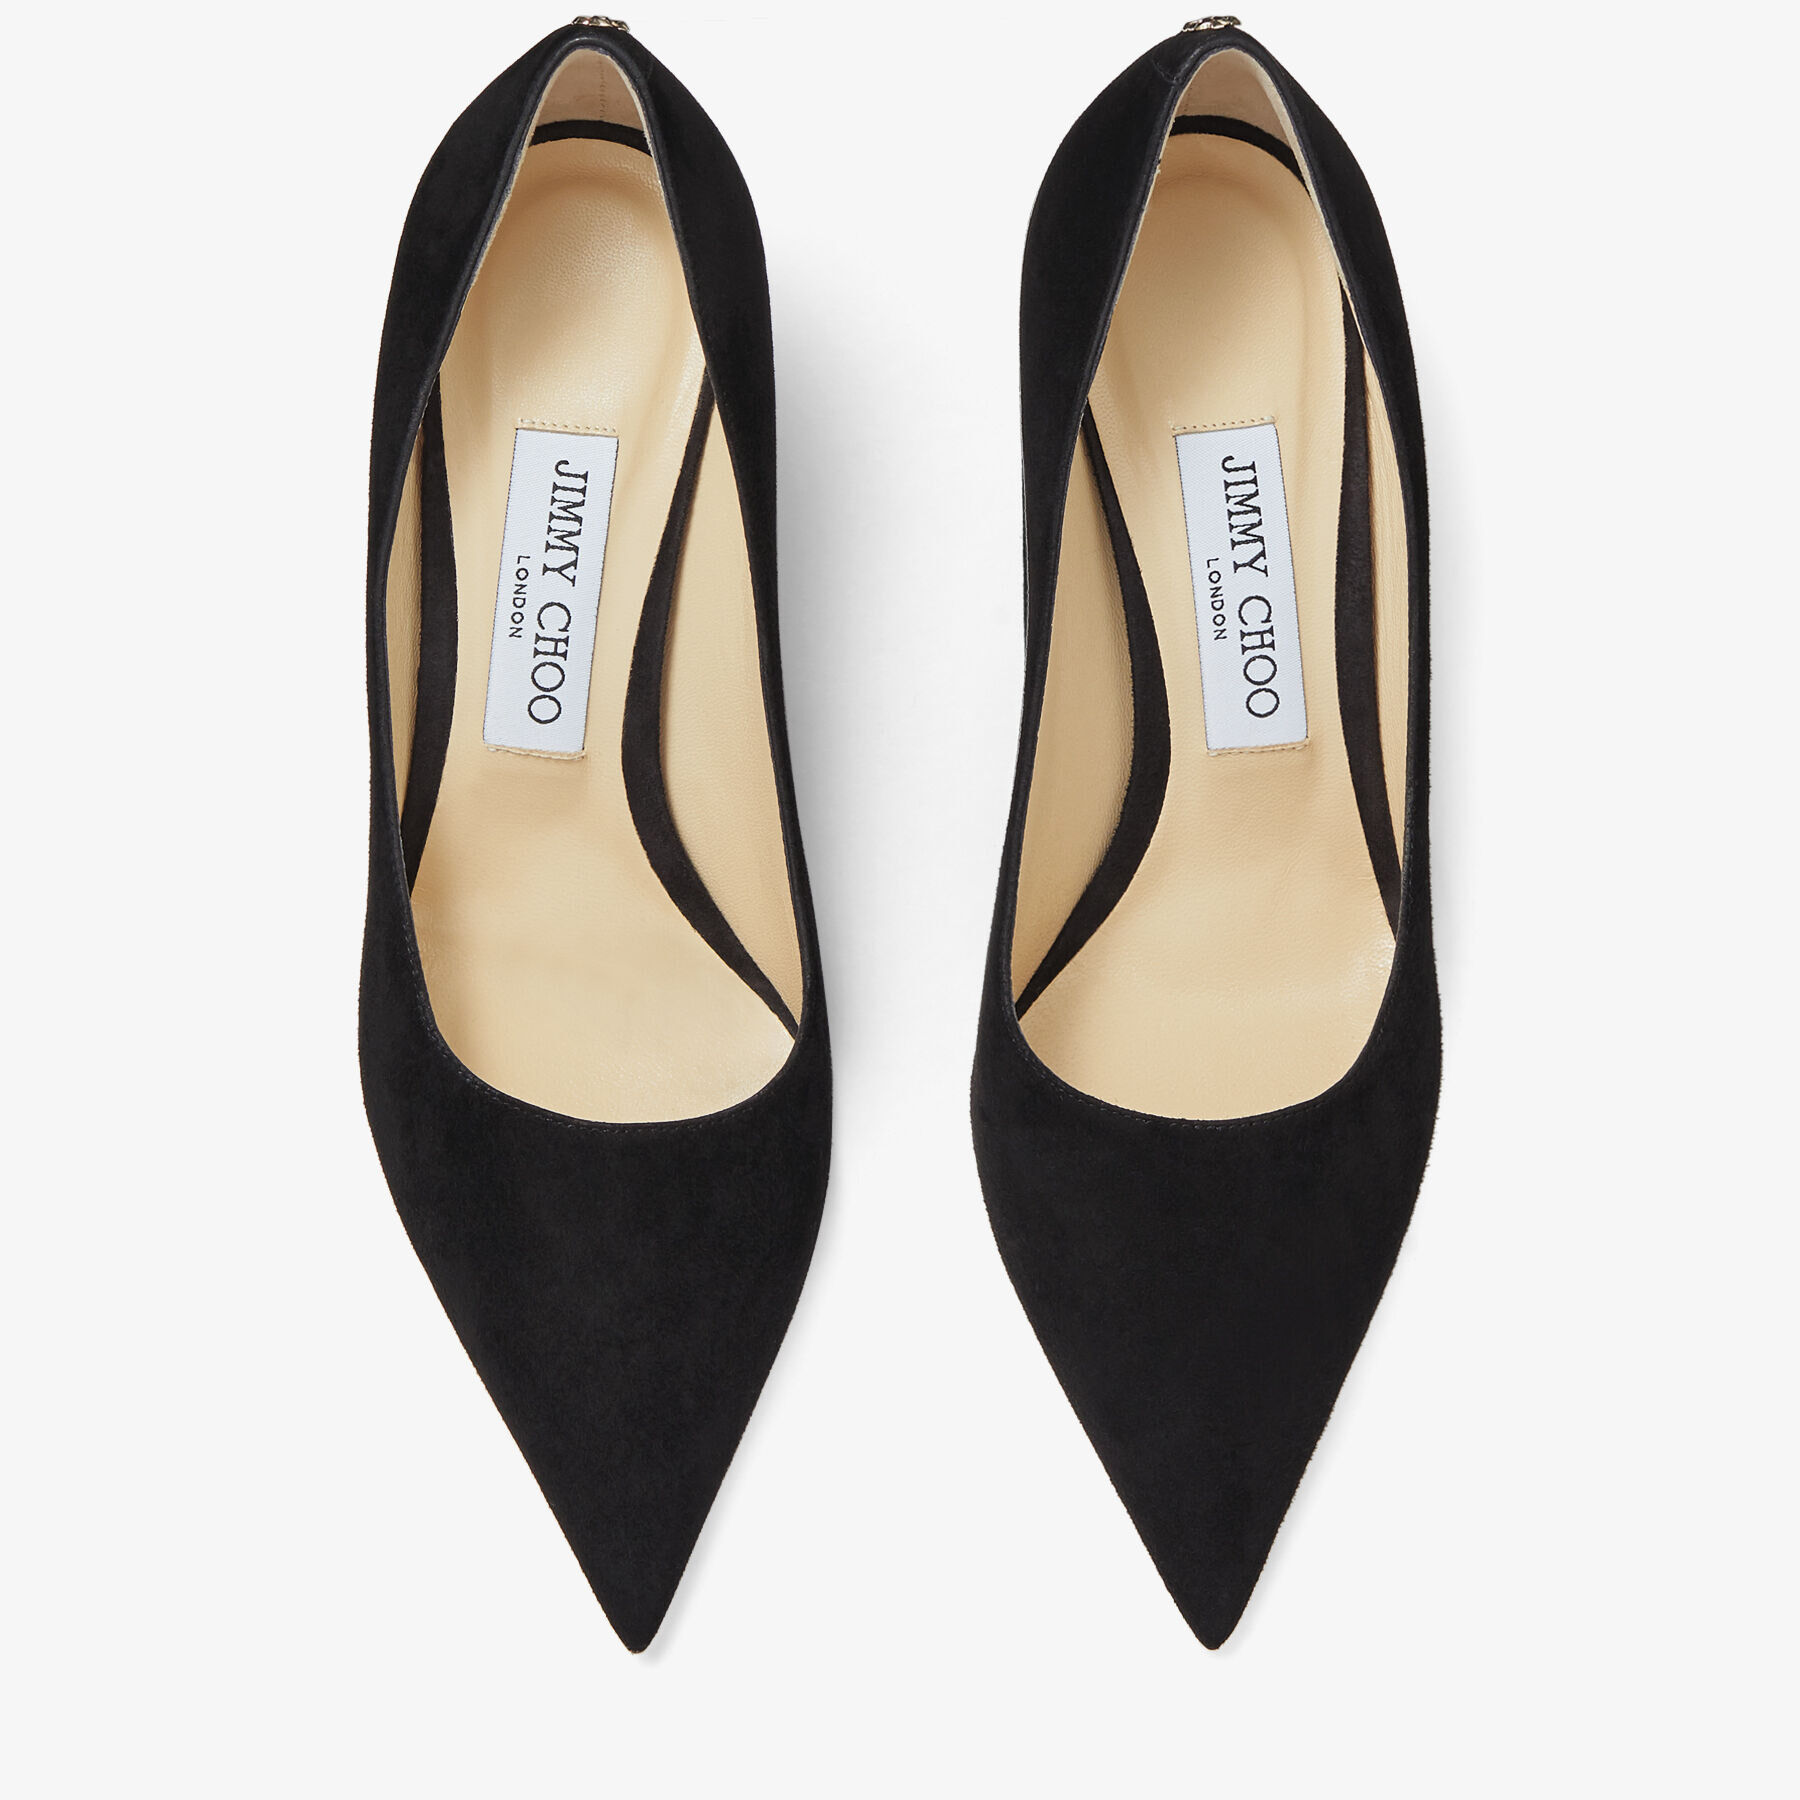 ON SALE* JIMMY CHOO #40129 Black Suede Pumps (US 8.5 EU 38.5) – ALL YOUR  BLISS